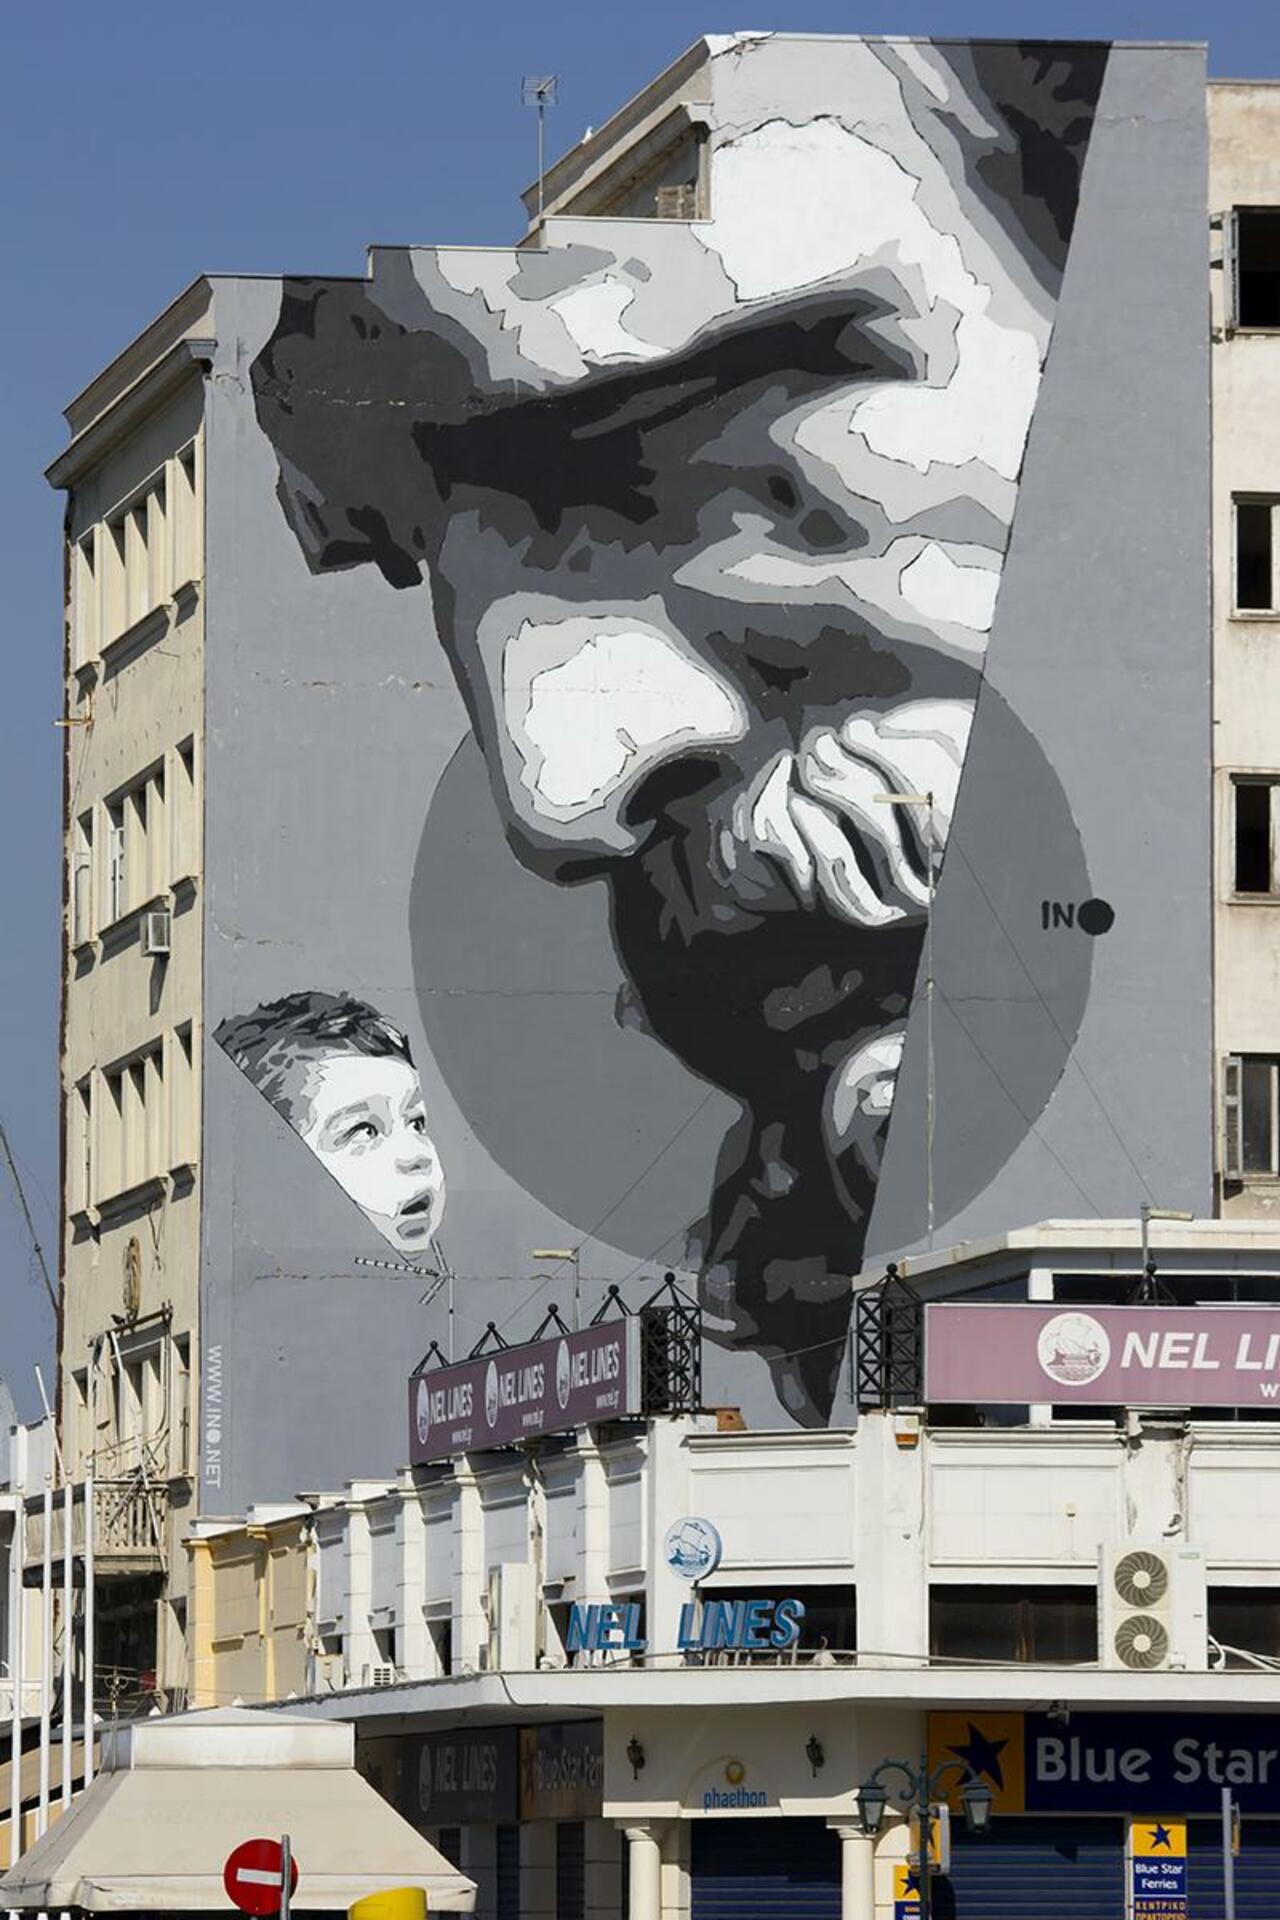 'We Have The Power', a new mural by iNO in Piraeus Port, Greece. #StreetArt #Graffiti #Mural http://t.co/QrfrjEOZi2